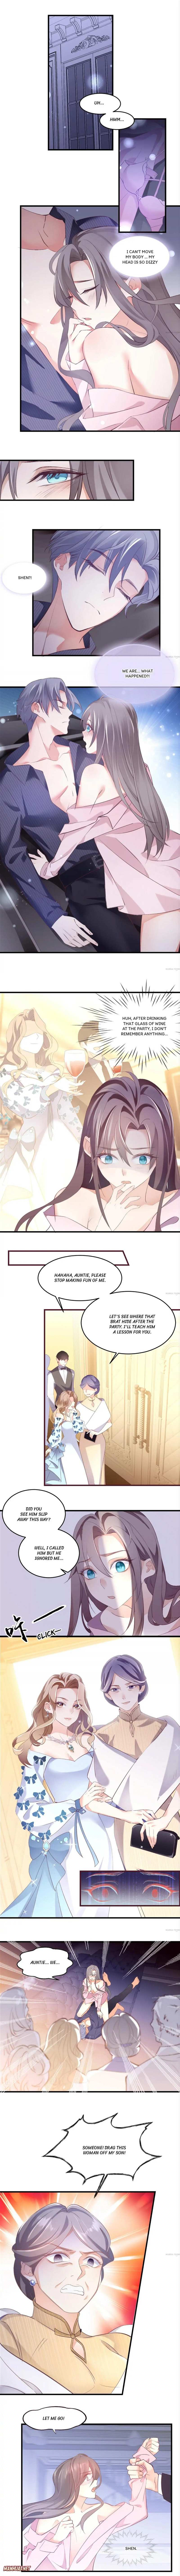 Keep Calm Mr Song chapter 1 - page 1